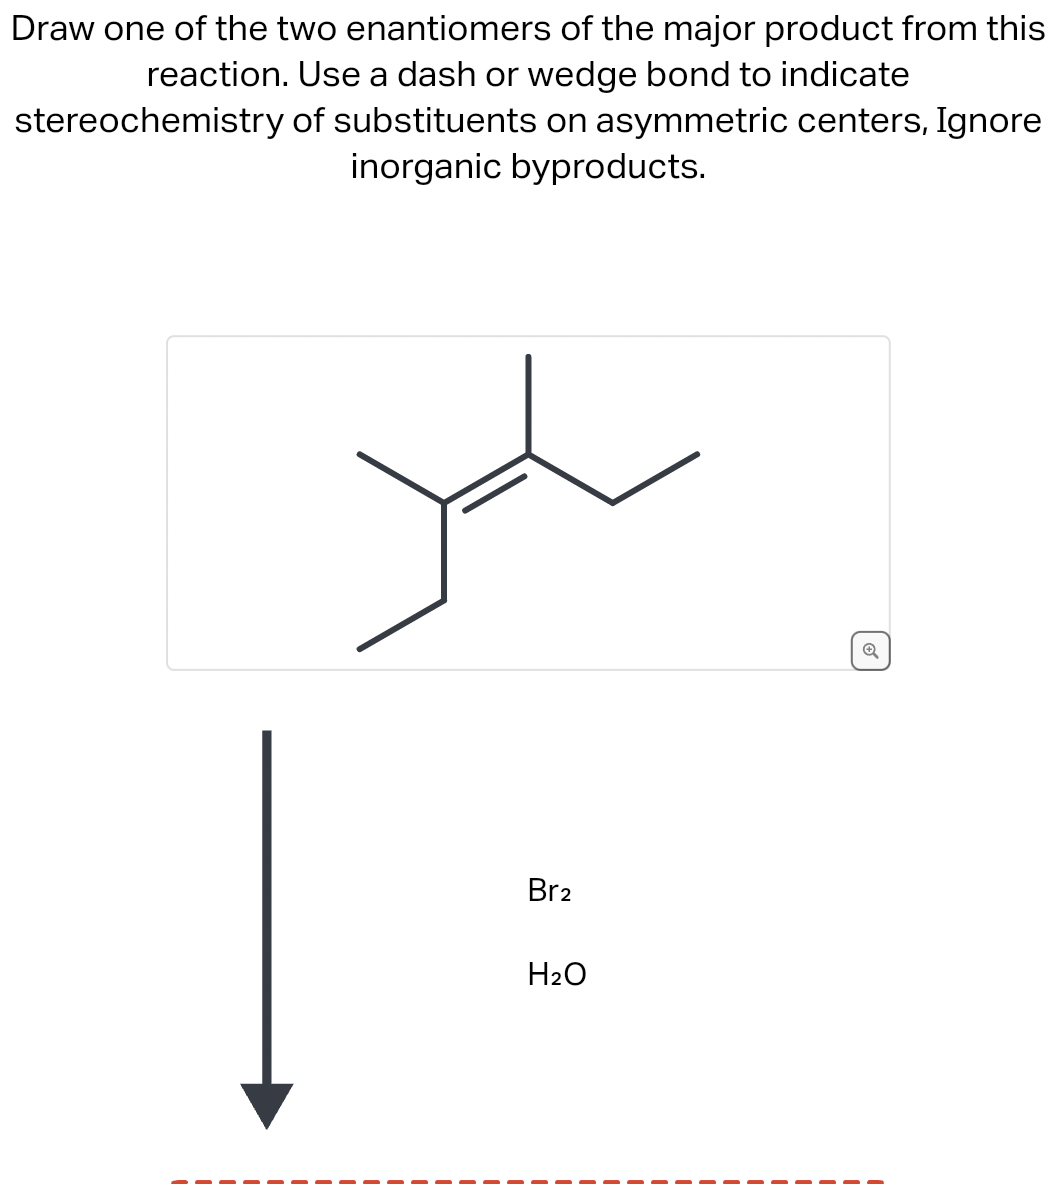 Draw one of the two enantiomers of the major product from this
reaction. Use a dash or wedge bond to indicate
stereochemistry
of substituents on asymmetric centers, Ignore
inorganic byproducts.
Br2
H₂O
Q